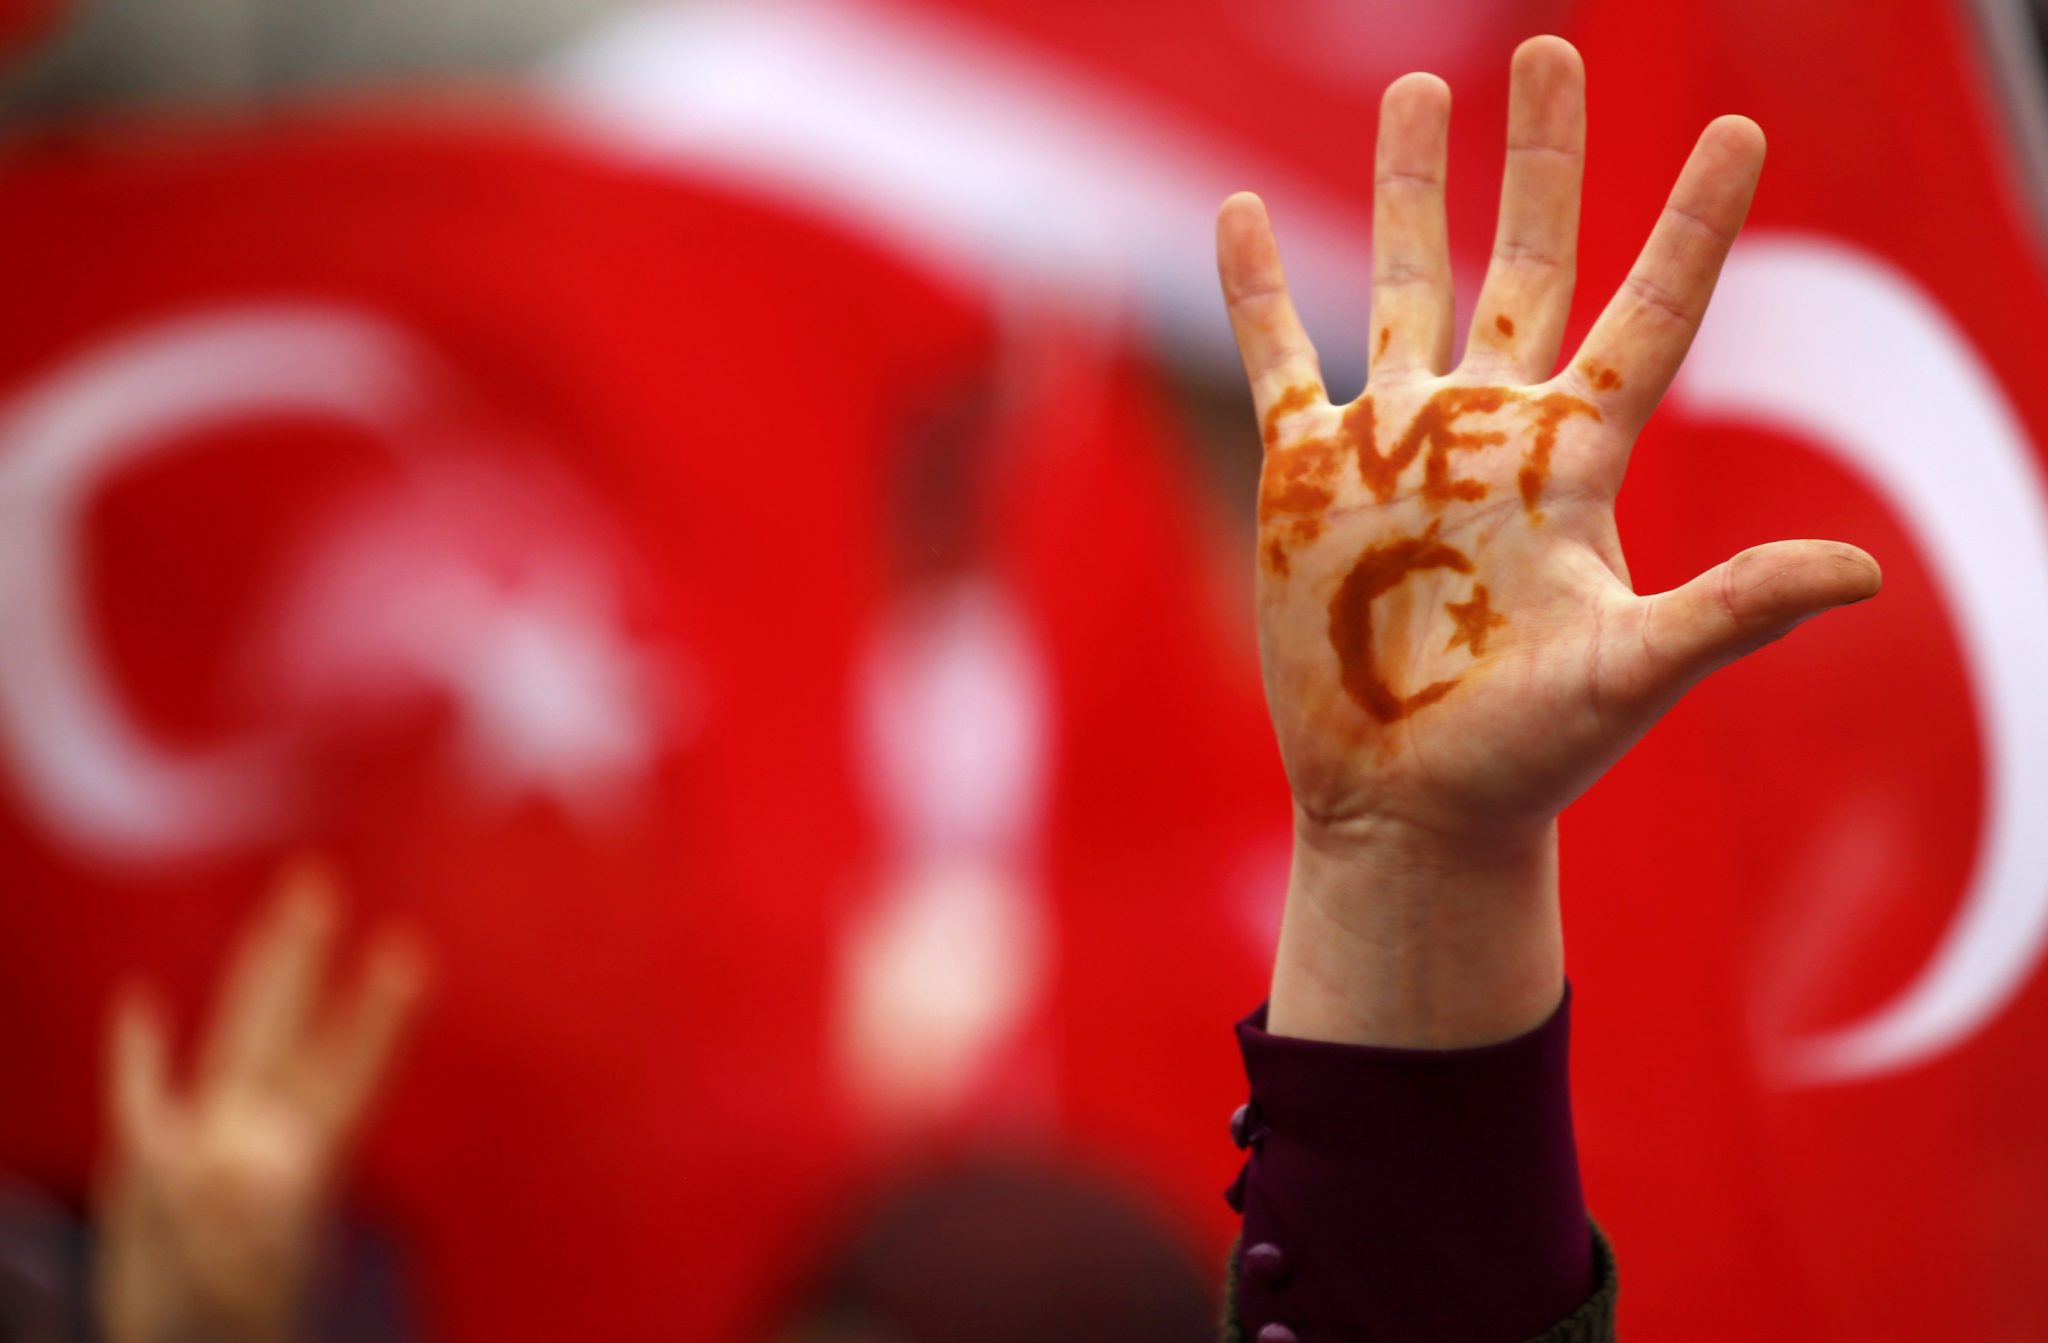 A supporter of Turkish President Tayyip Erdogan shows her hand painted with the word "yes" during a rally for the upcoming referendum in the Kurdish-dominated southeastern city of Diyarbakir, Turkey, April 1, 2017. REUTERS/Murad Sezer